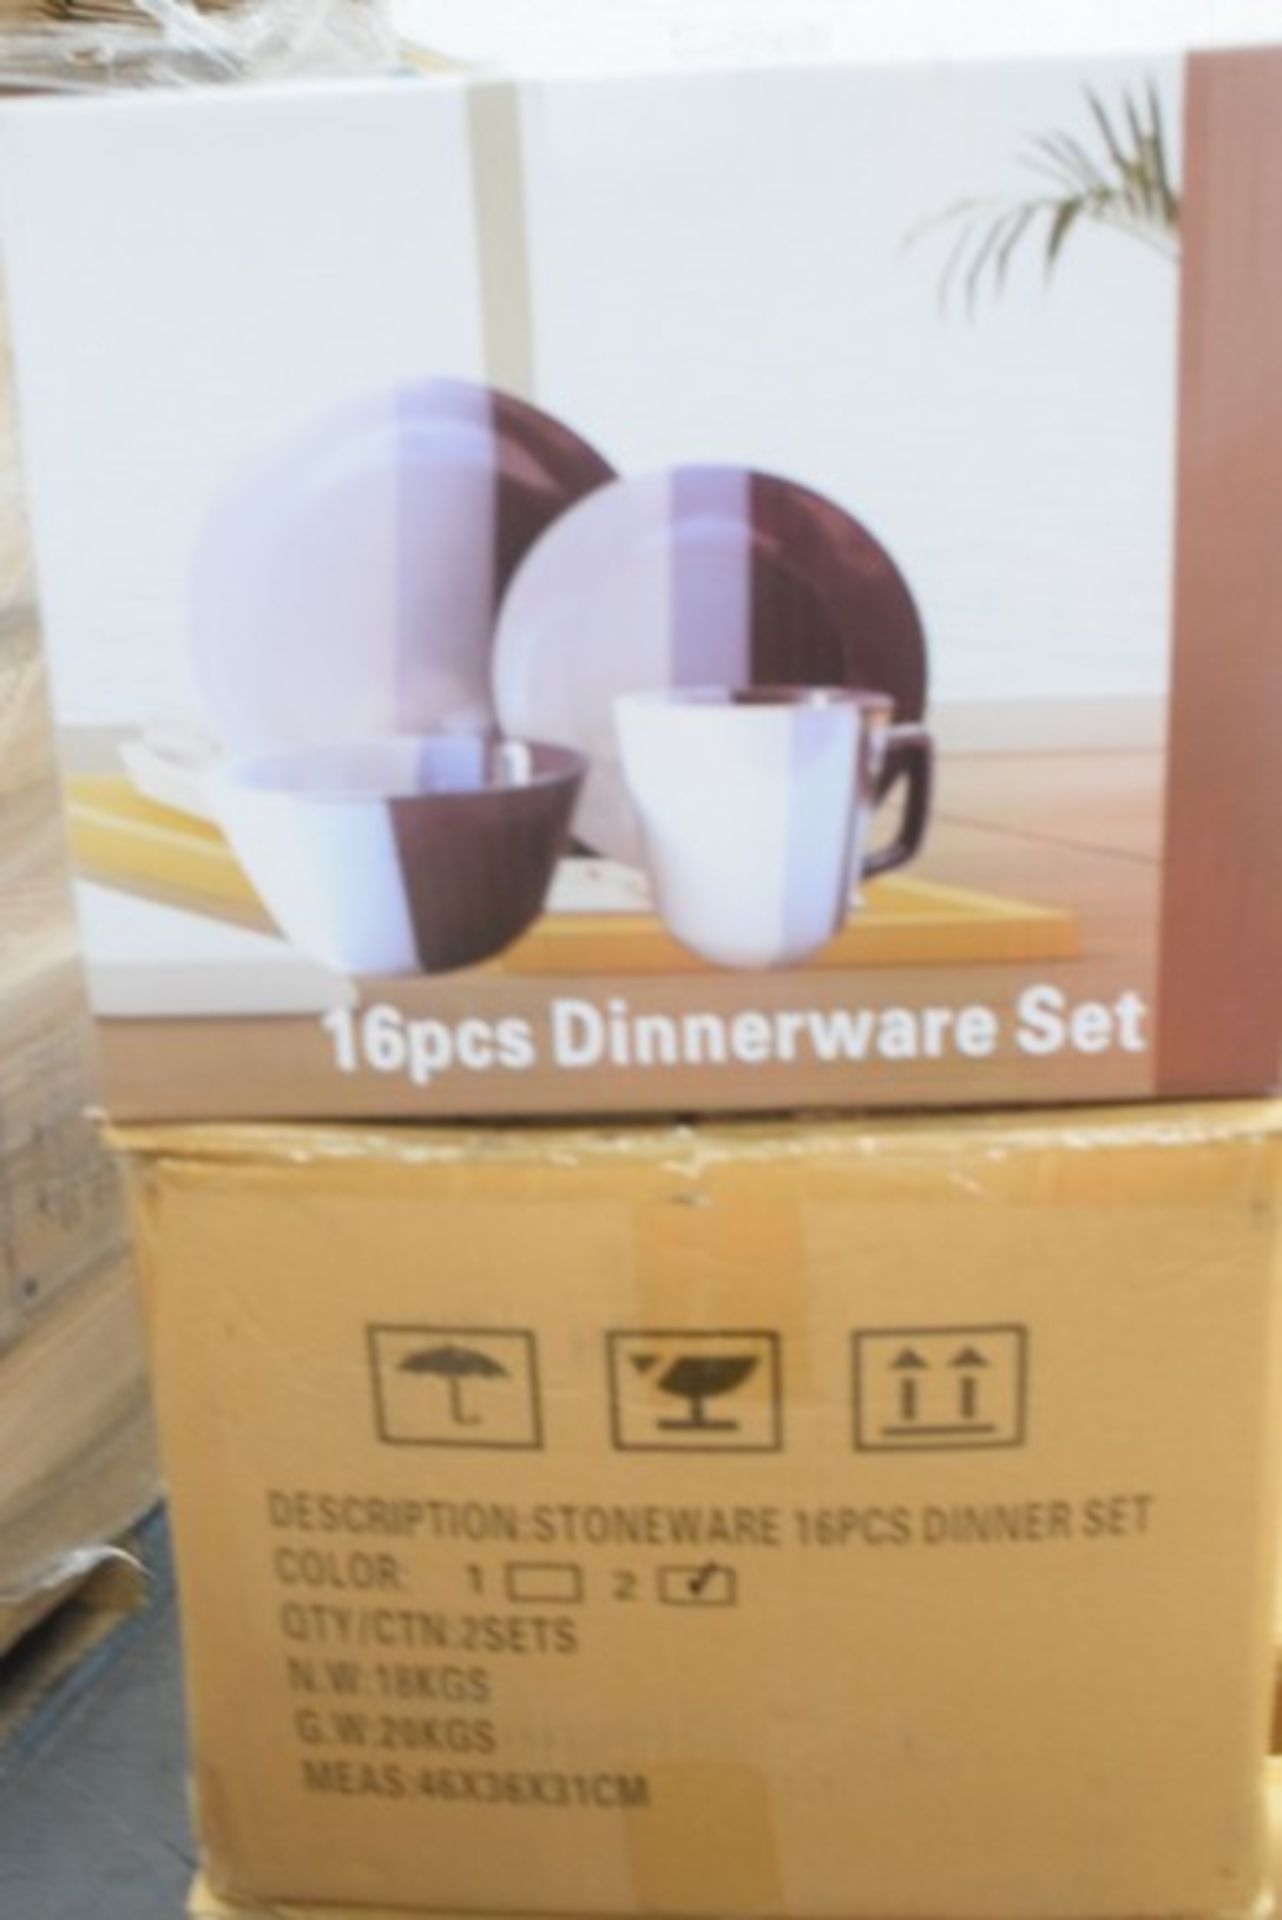 2 x BOXED BRAND NEW 16 PIECE DINNERWARE SETS RRP £30 EACH *PLEASE NOTE THAT THE BID PRICE IS